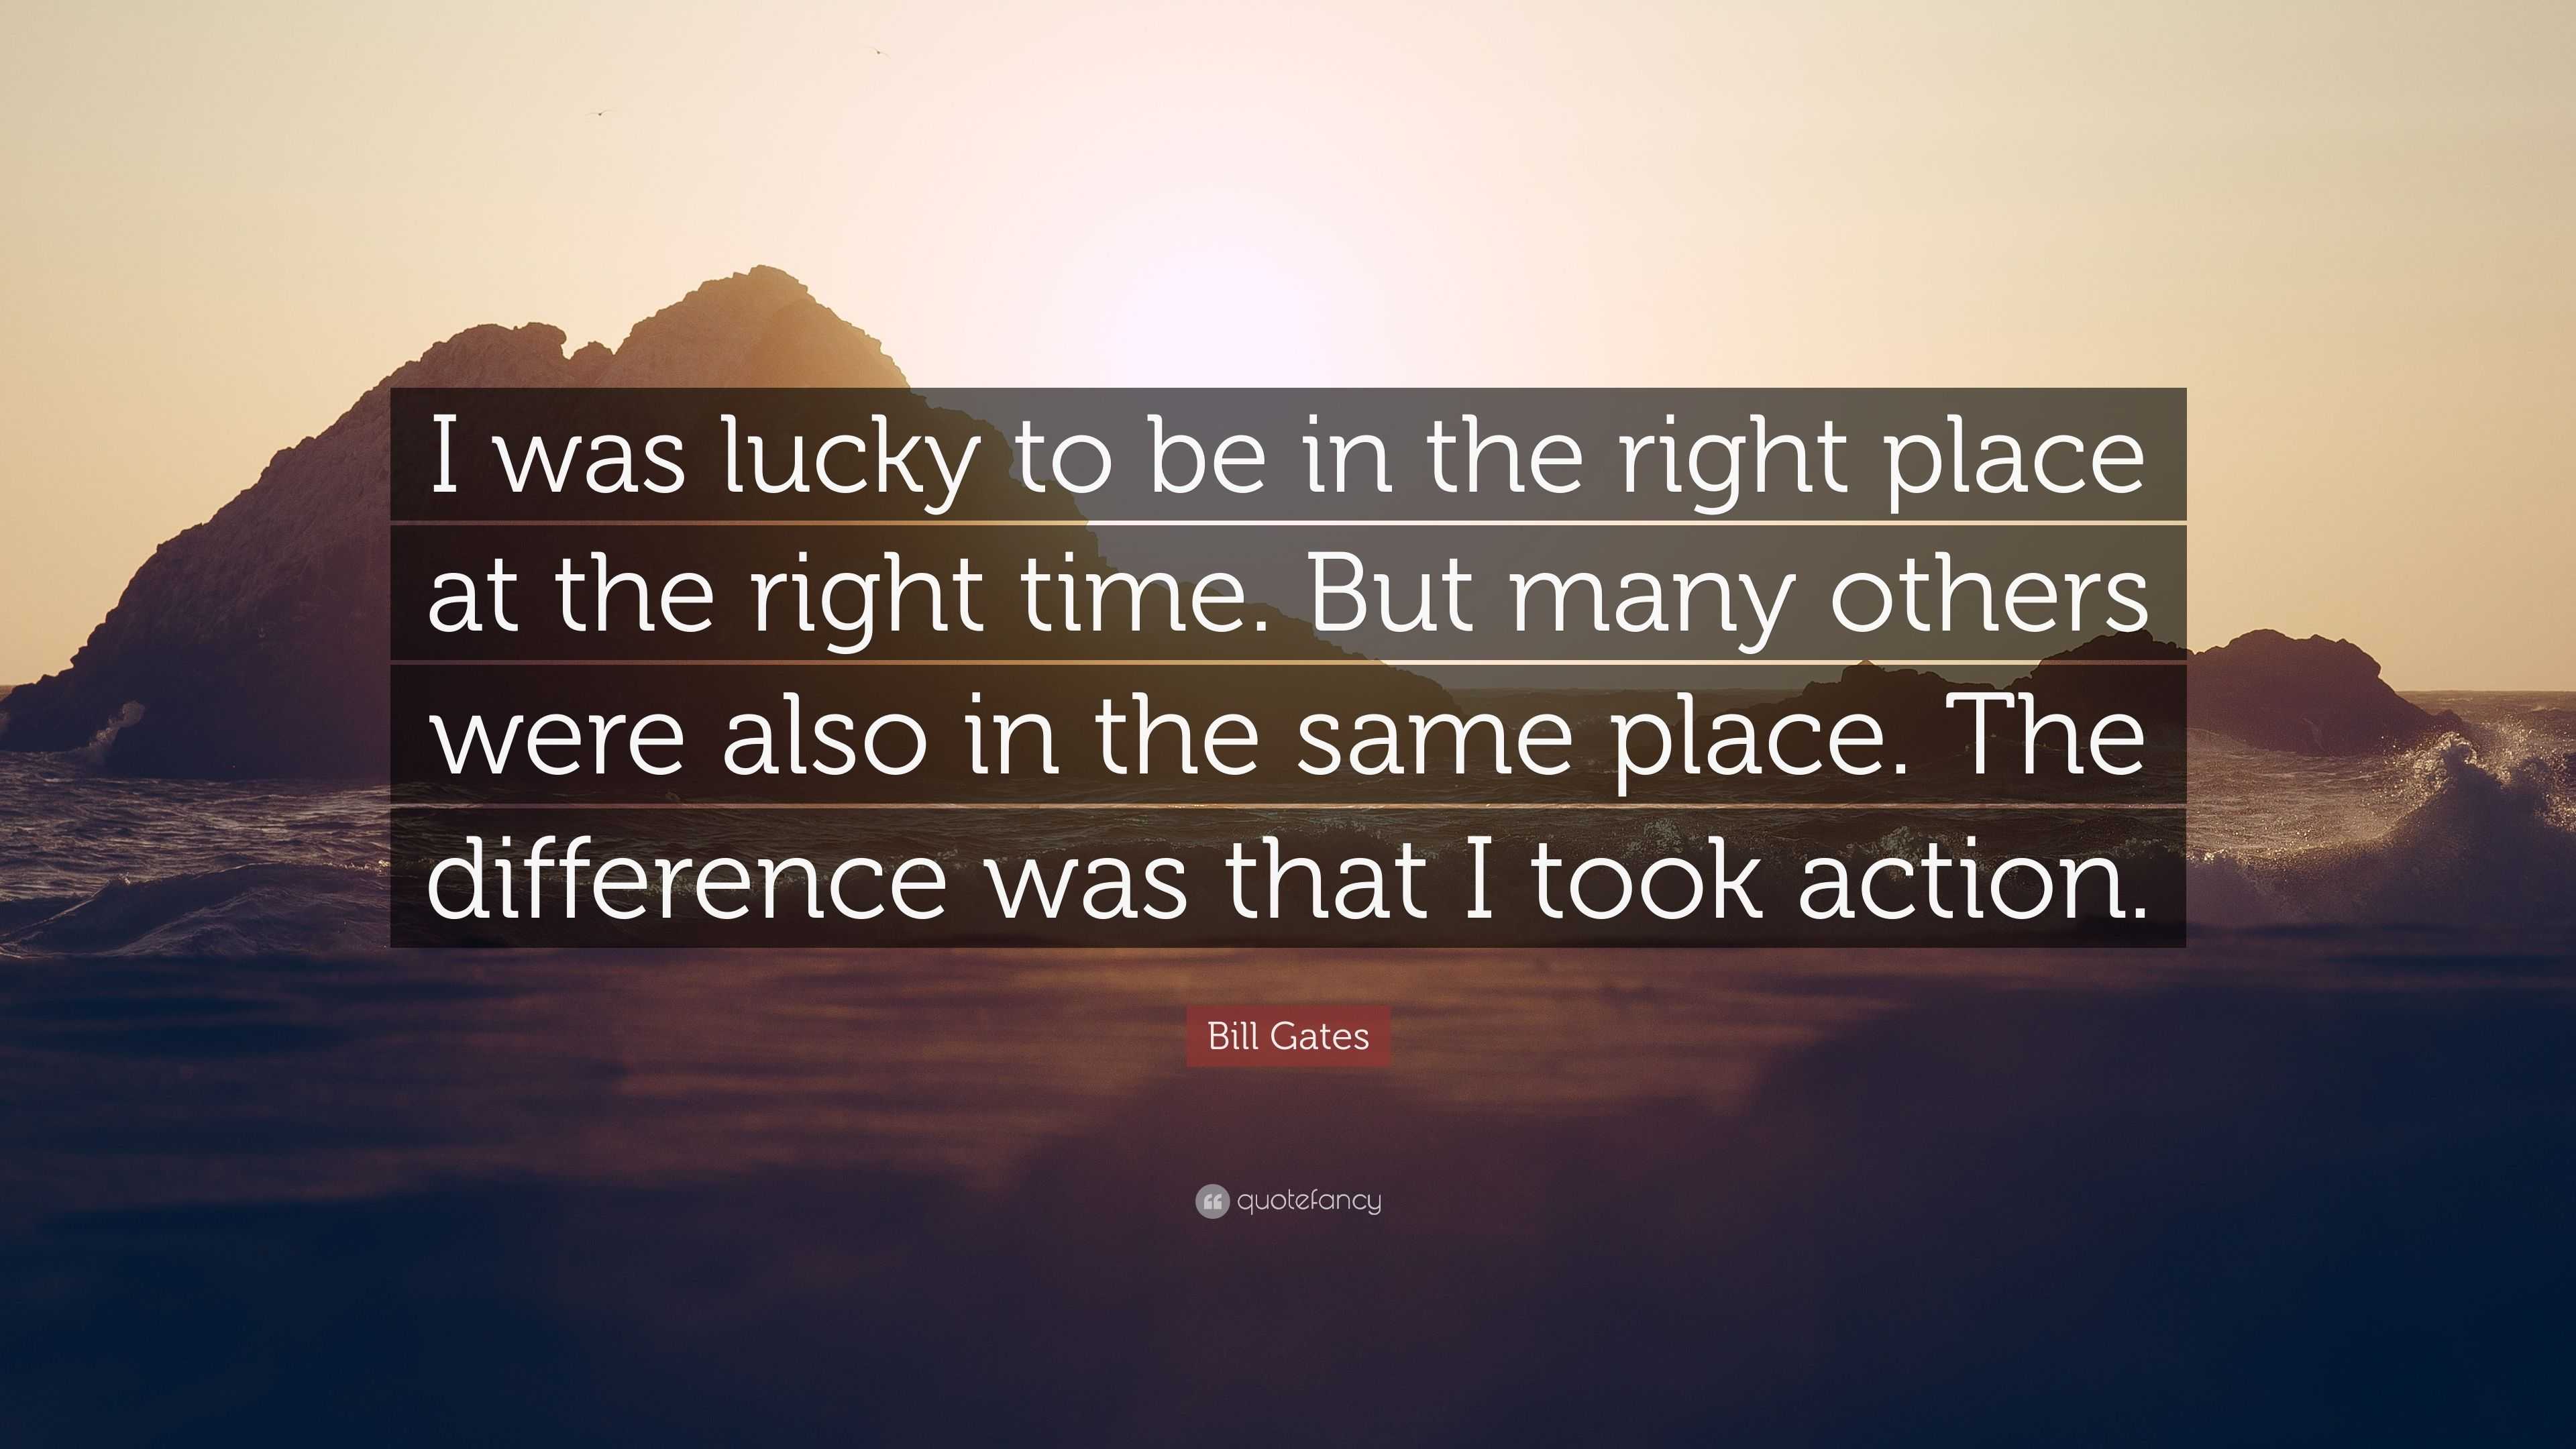 Bill Gates Quote “I was lucky to be in the right place at the